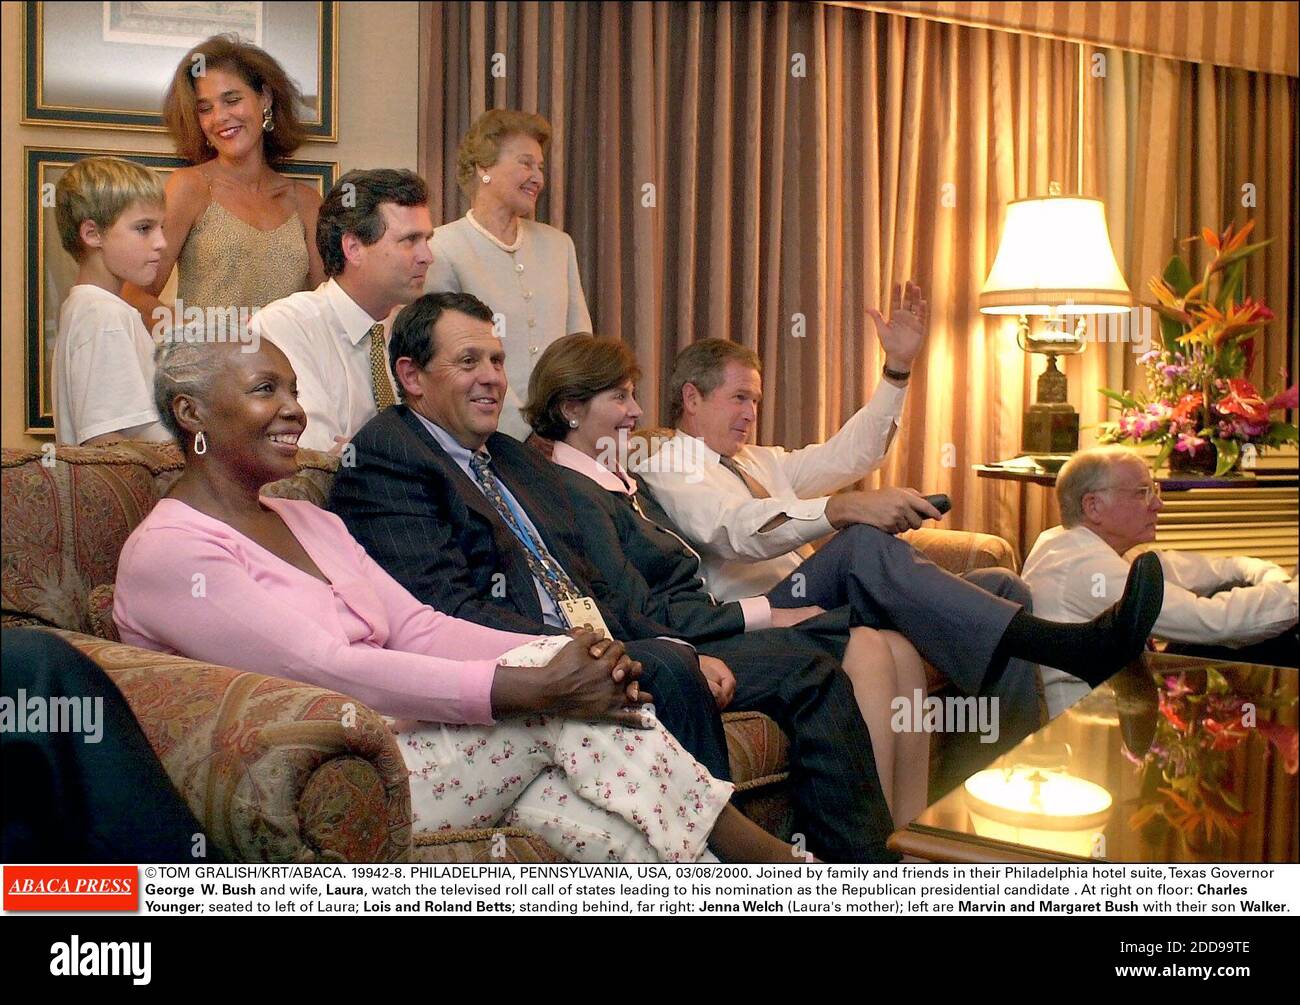 NO FILM, NO VIDEO, NO TV, NO DOCUMENTARY - © TOM GRALISH/KRT/ABACA. 19942-8. PHILADELPHIA, PENNSYLVANIA, USA, 03/08/2000. Joined by family and friends in their Philadelphia hotel suite, Texas Governor George W. Bush and wife, Laura, watch the televised roll call of states leading to his nomination Stock Photo